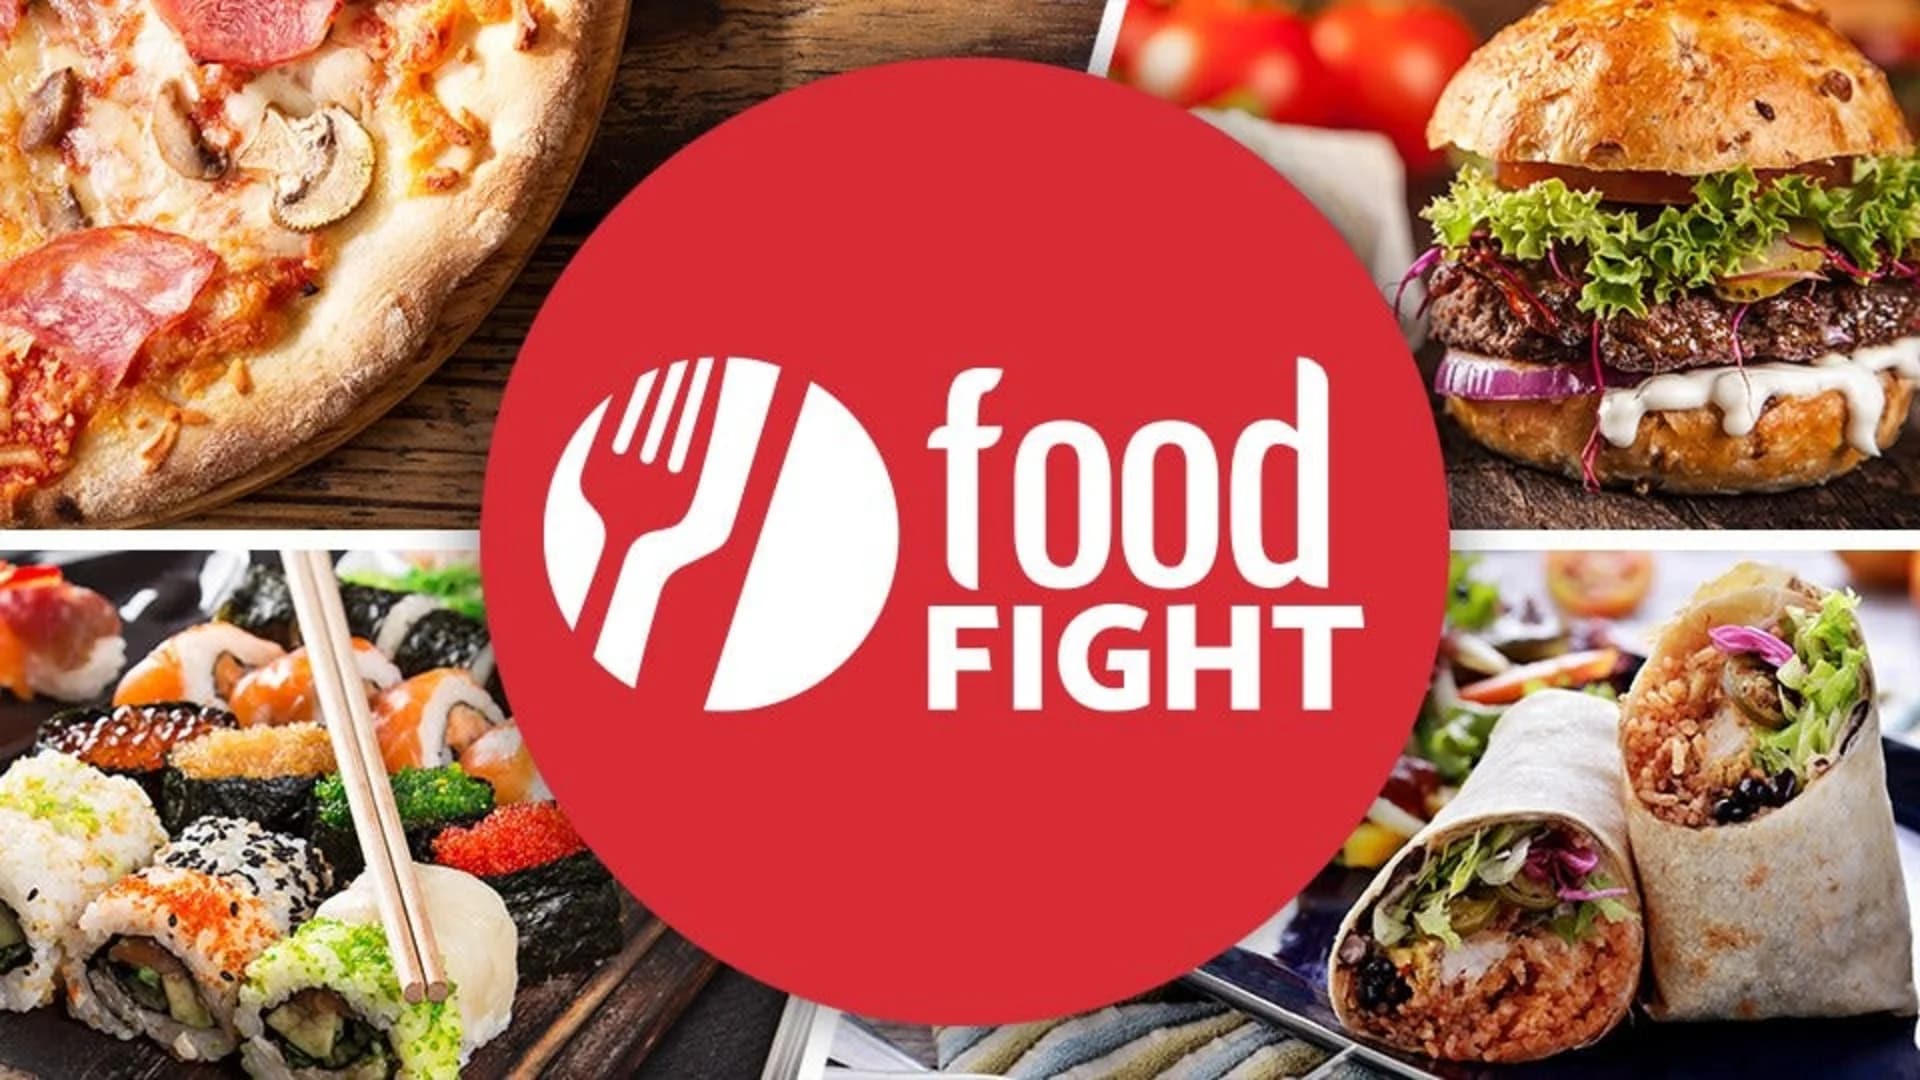 NEWS 12 “FOOD FIGHT” CONTEST OFFICIAL RULES